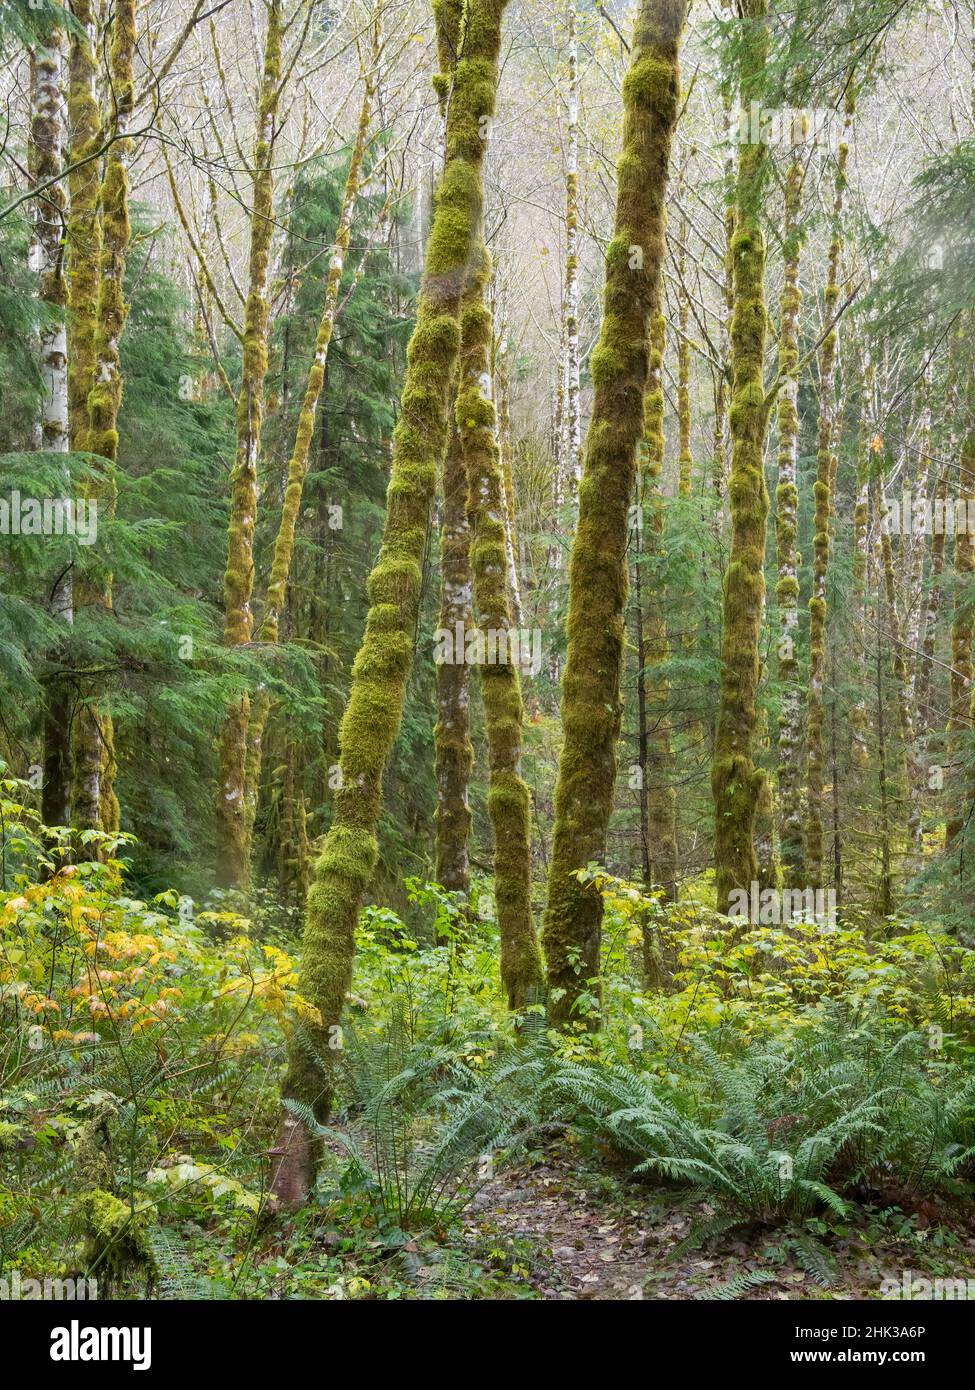 Washington State, Central Cascades, Pratt River Area, Moss covered Red Alder trees Stock Photo